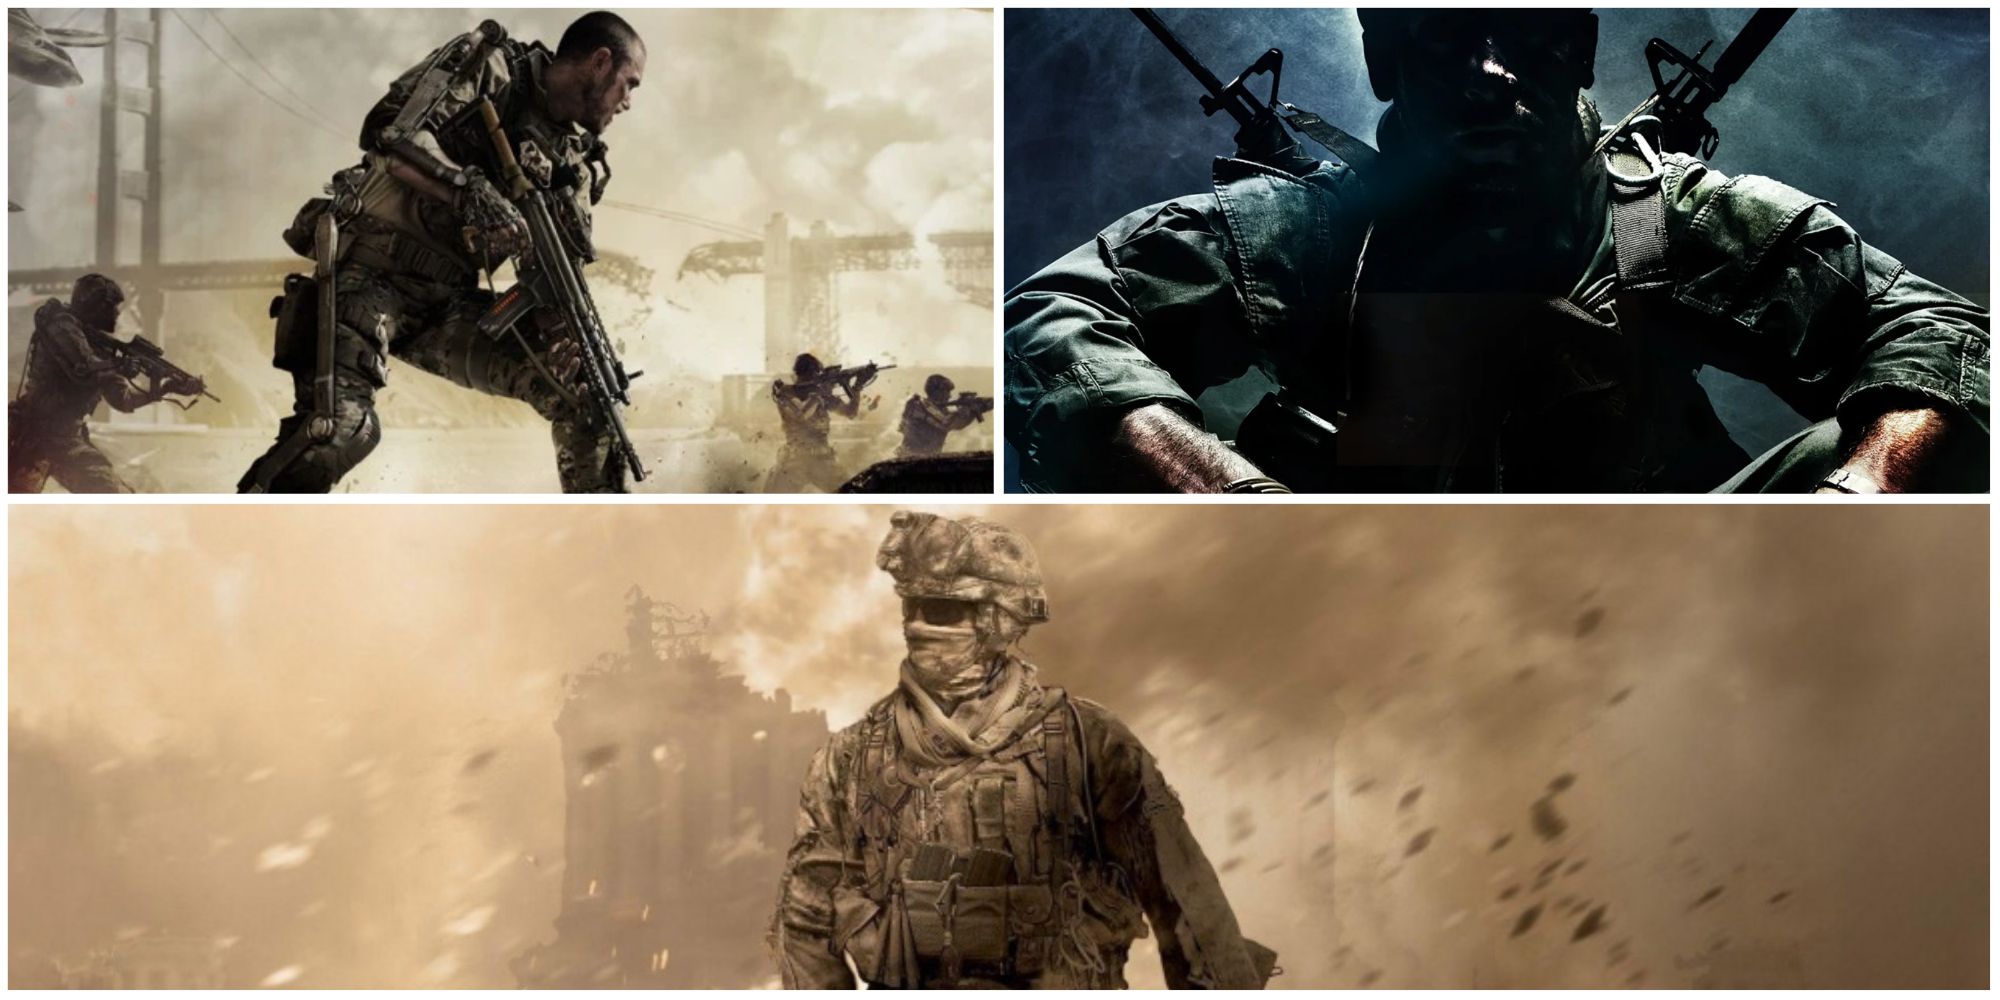 Call of Duty Modern Warfare 3 Is One of the Worst Rated Games on Steam